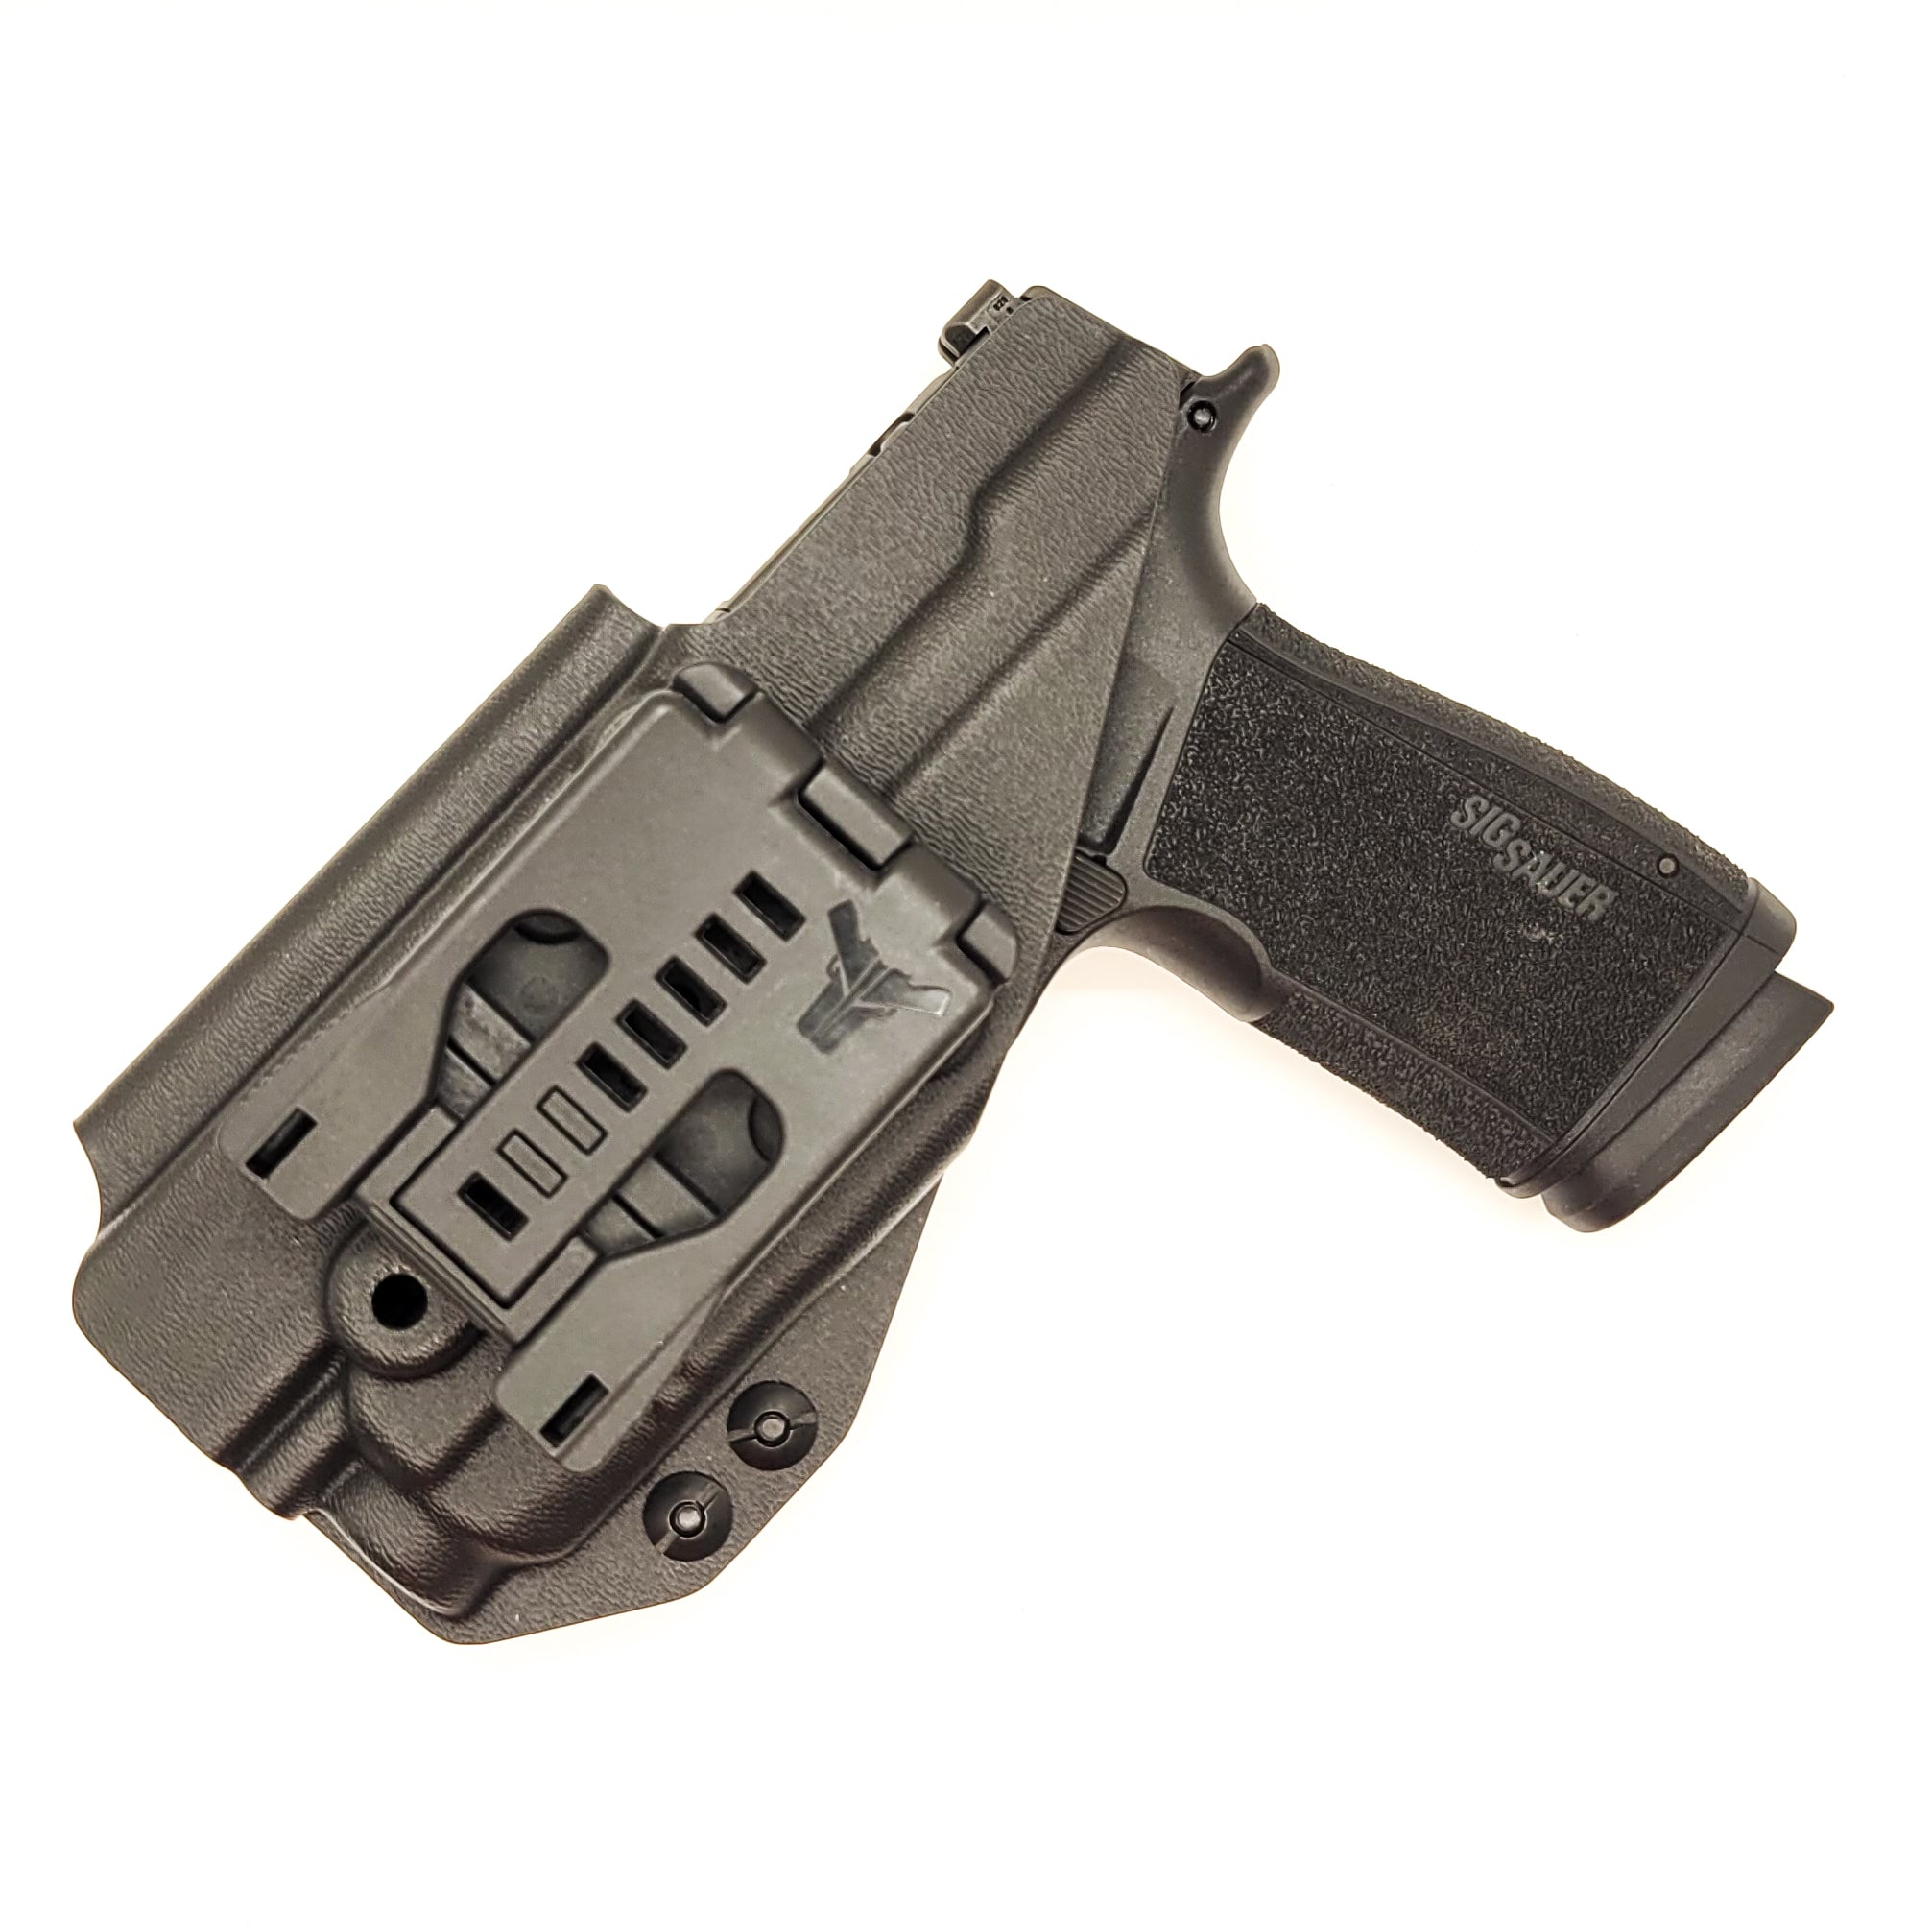 For the best Outside Waistband Kydex Holster designed to fit the Sig Sauer P365-XMACRO with Streamlight TLR-7 or TLR-7A, shop Four Brothers Holsters.  Full sweat guard, adjustable retention, minimal material & smooth edges to reduce printing. Made in USA. Open muzzle for threaded barrels, Cleared for red dot sights.